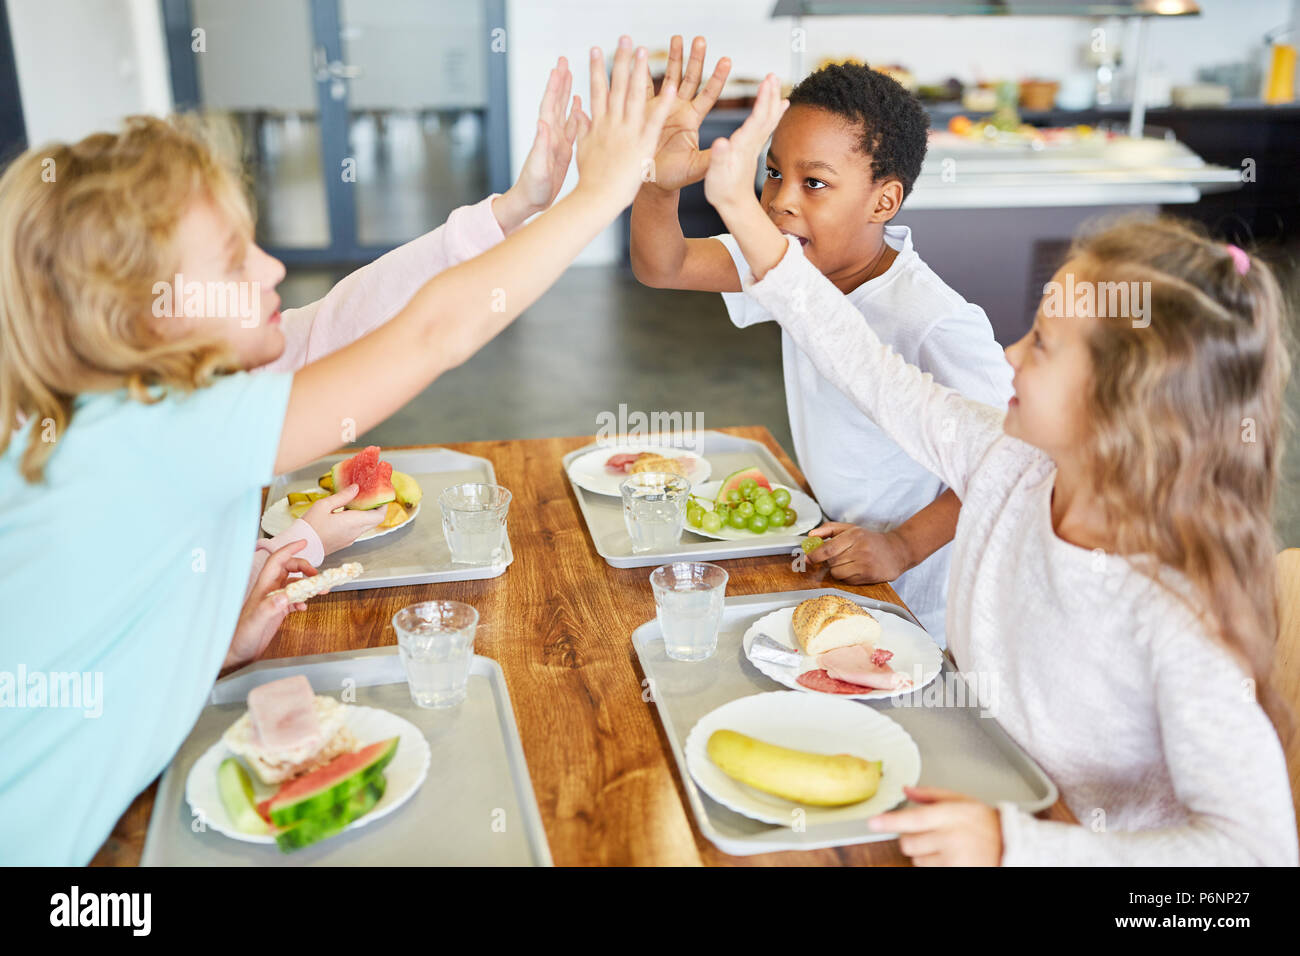 https://c8.alamy.com/comp/P6NP27/children-as-friends-have-fun-in-the-school-canteen-at-lunch-P6NP27.jpg